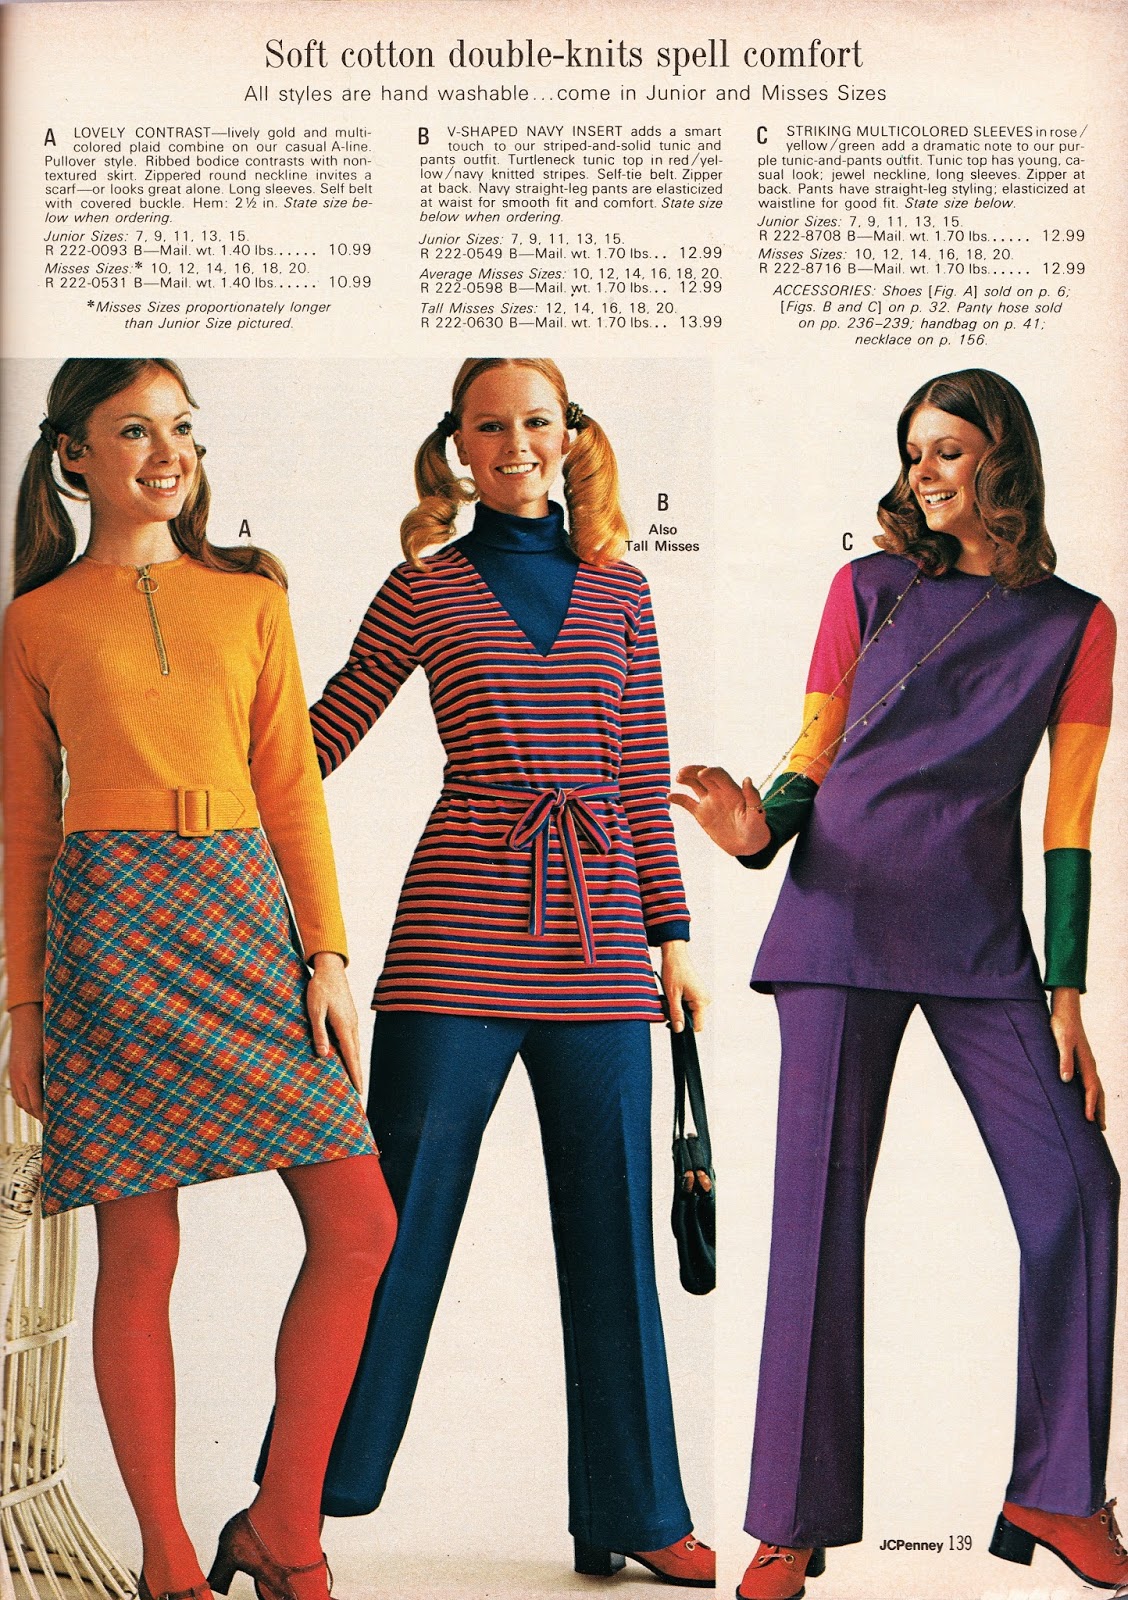 Kathy Loghry Blogspot: That's So 70s: Fall into Fall Fashions!!